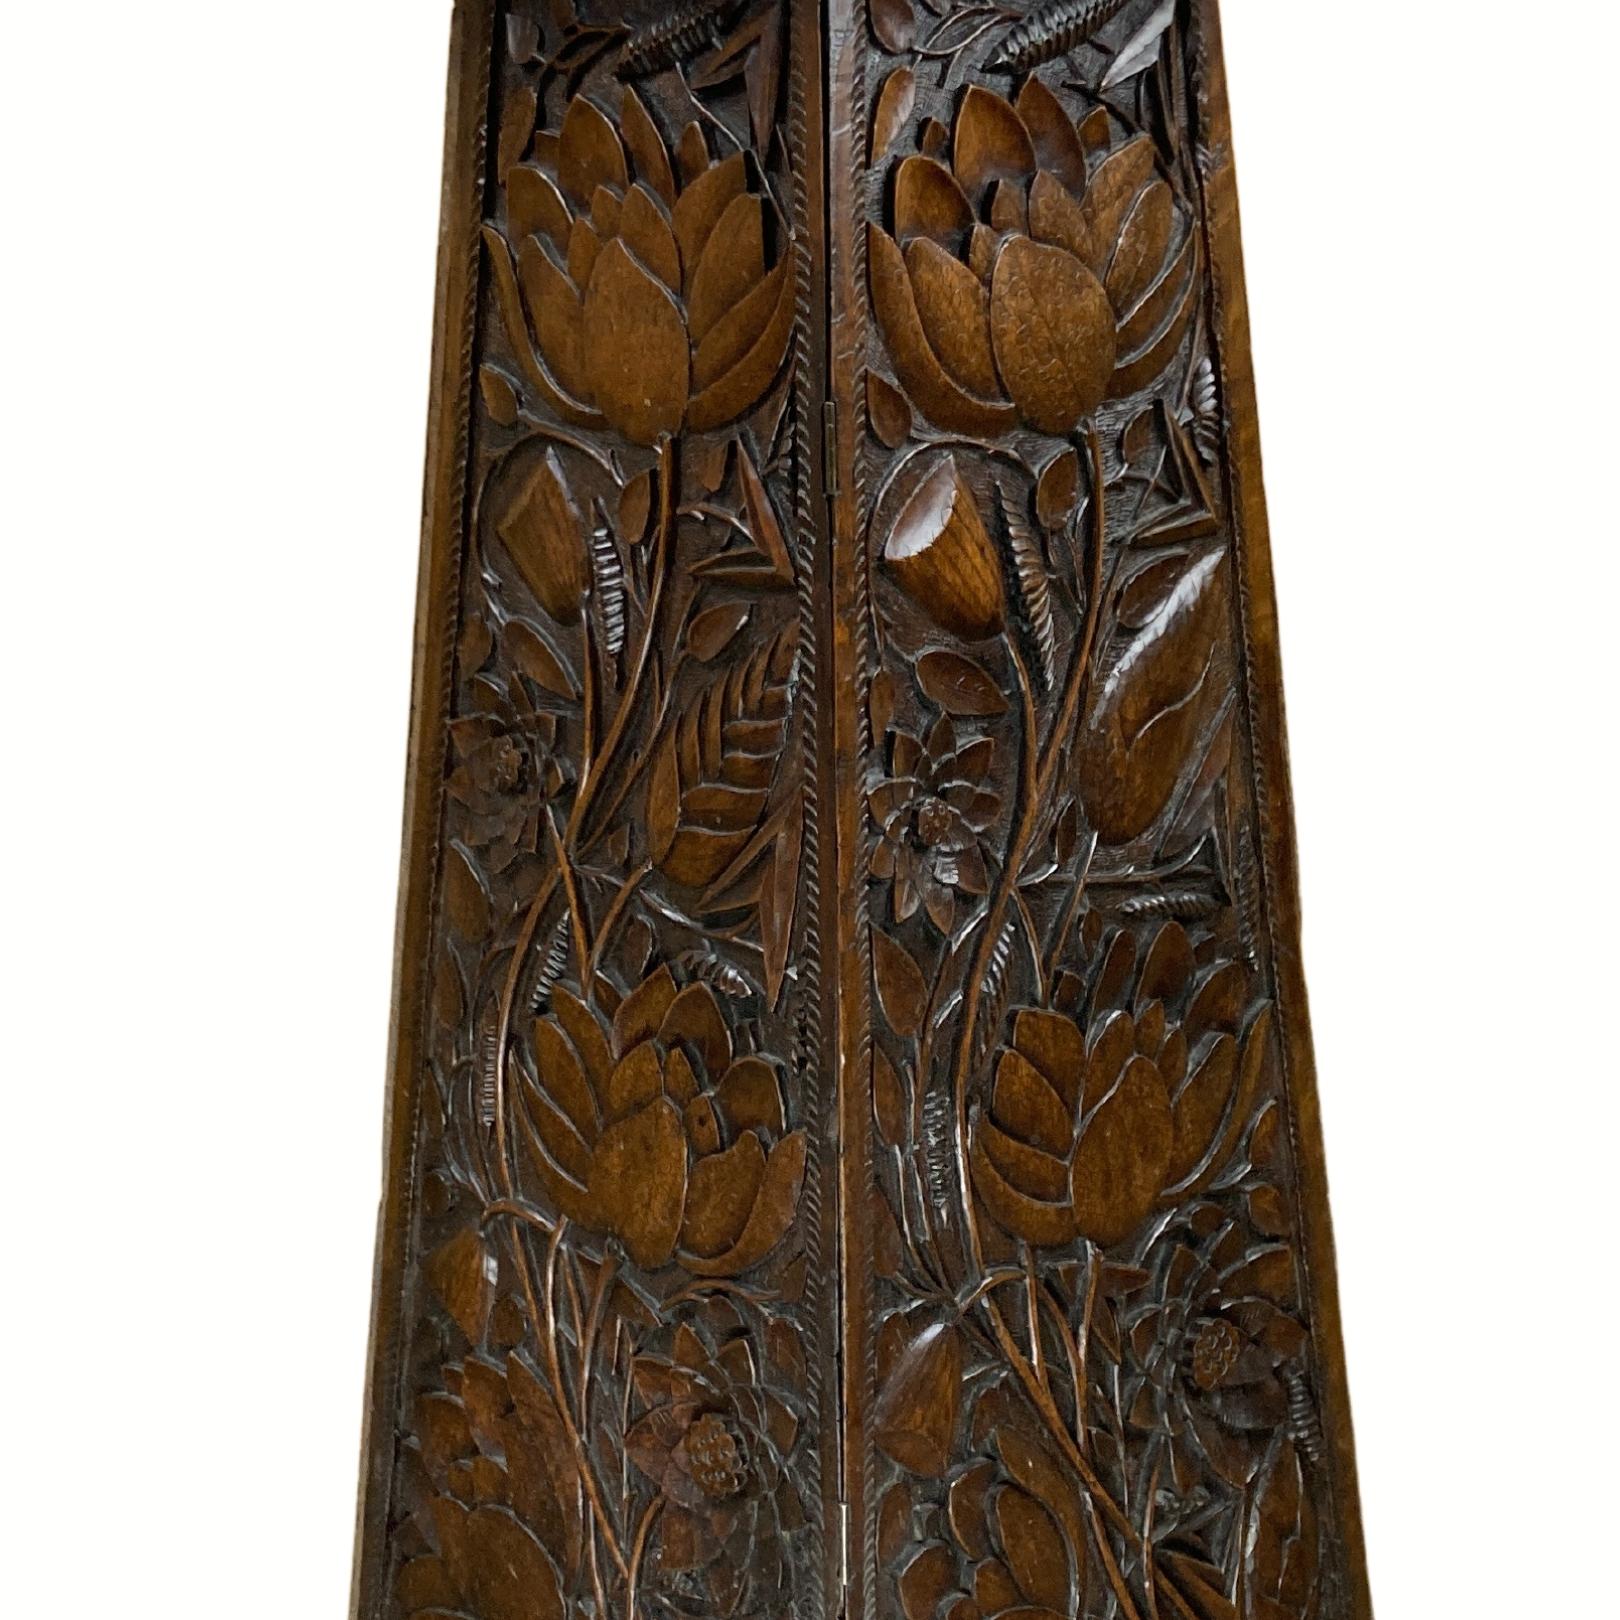 An extraordinary detailed hand carved arts and crafts pedestal from england, ca 1880. This large pedestal ( 120 cm ) originally was foldable, over time it has been fastened on the inside as can be seen in the last pic, the top has also been fastened